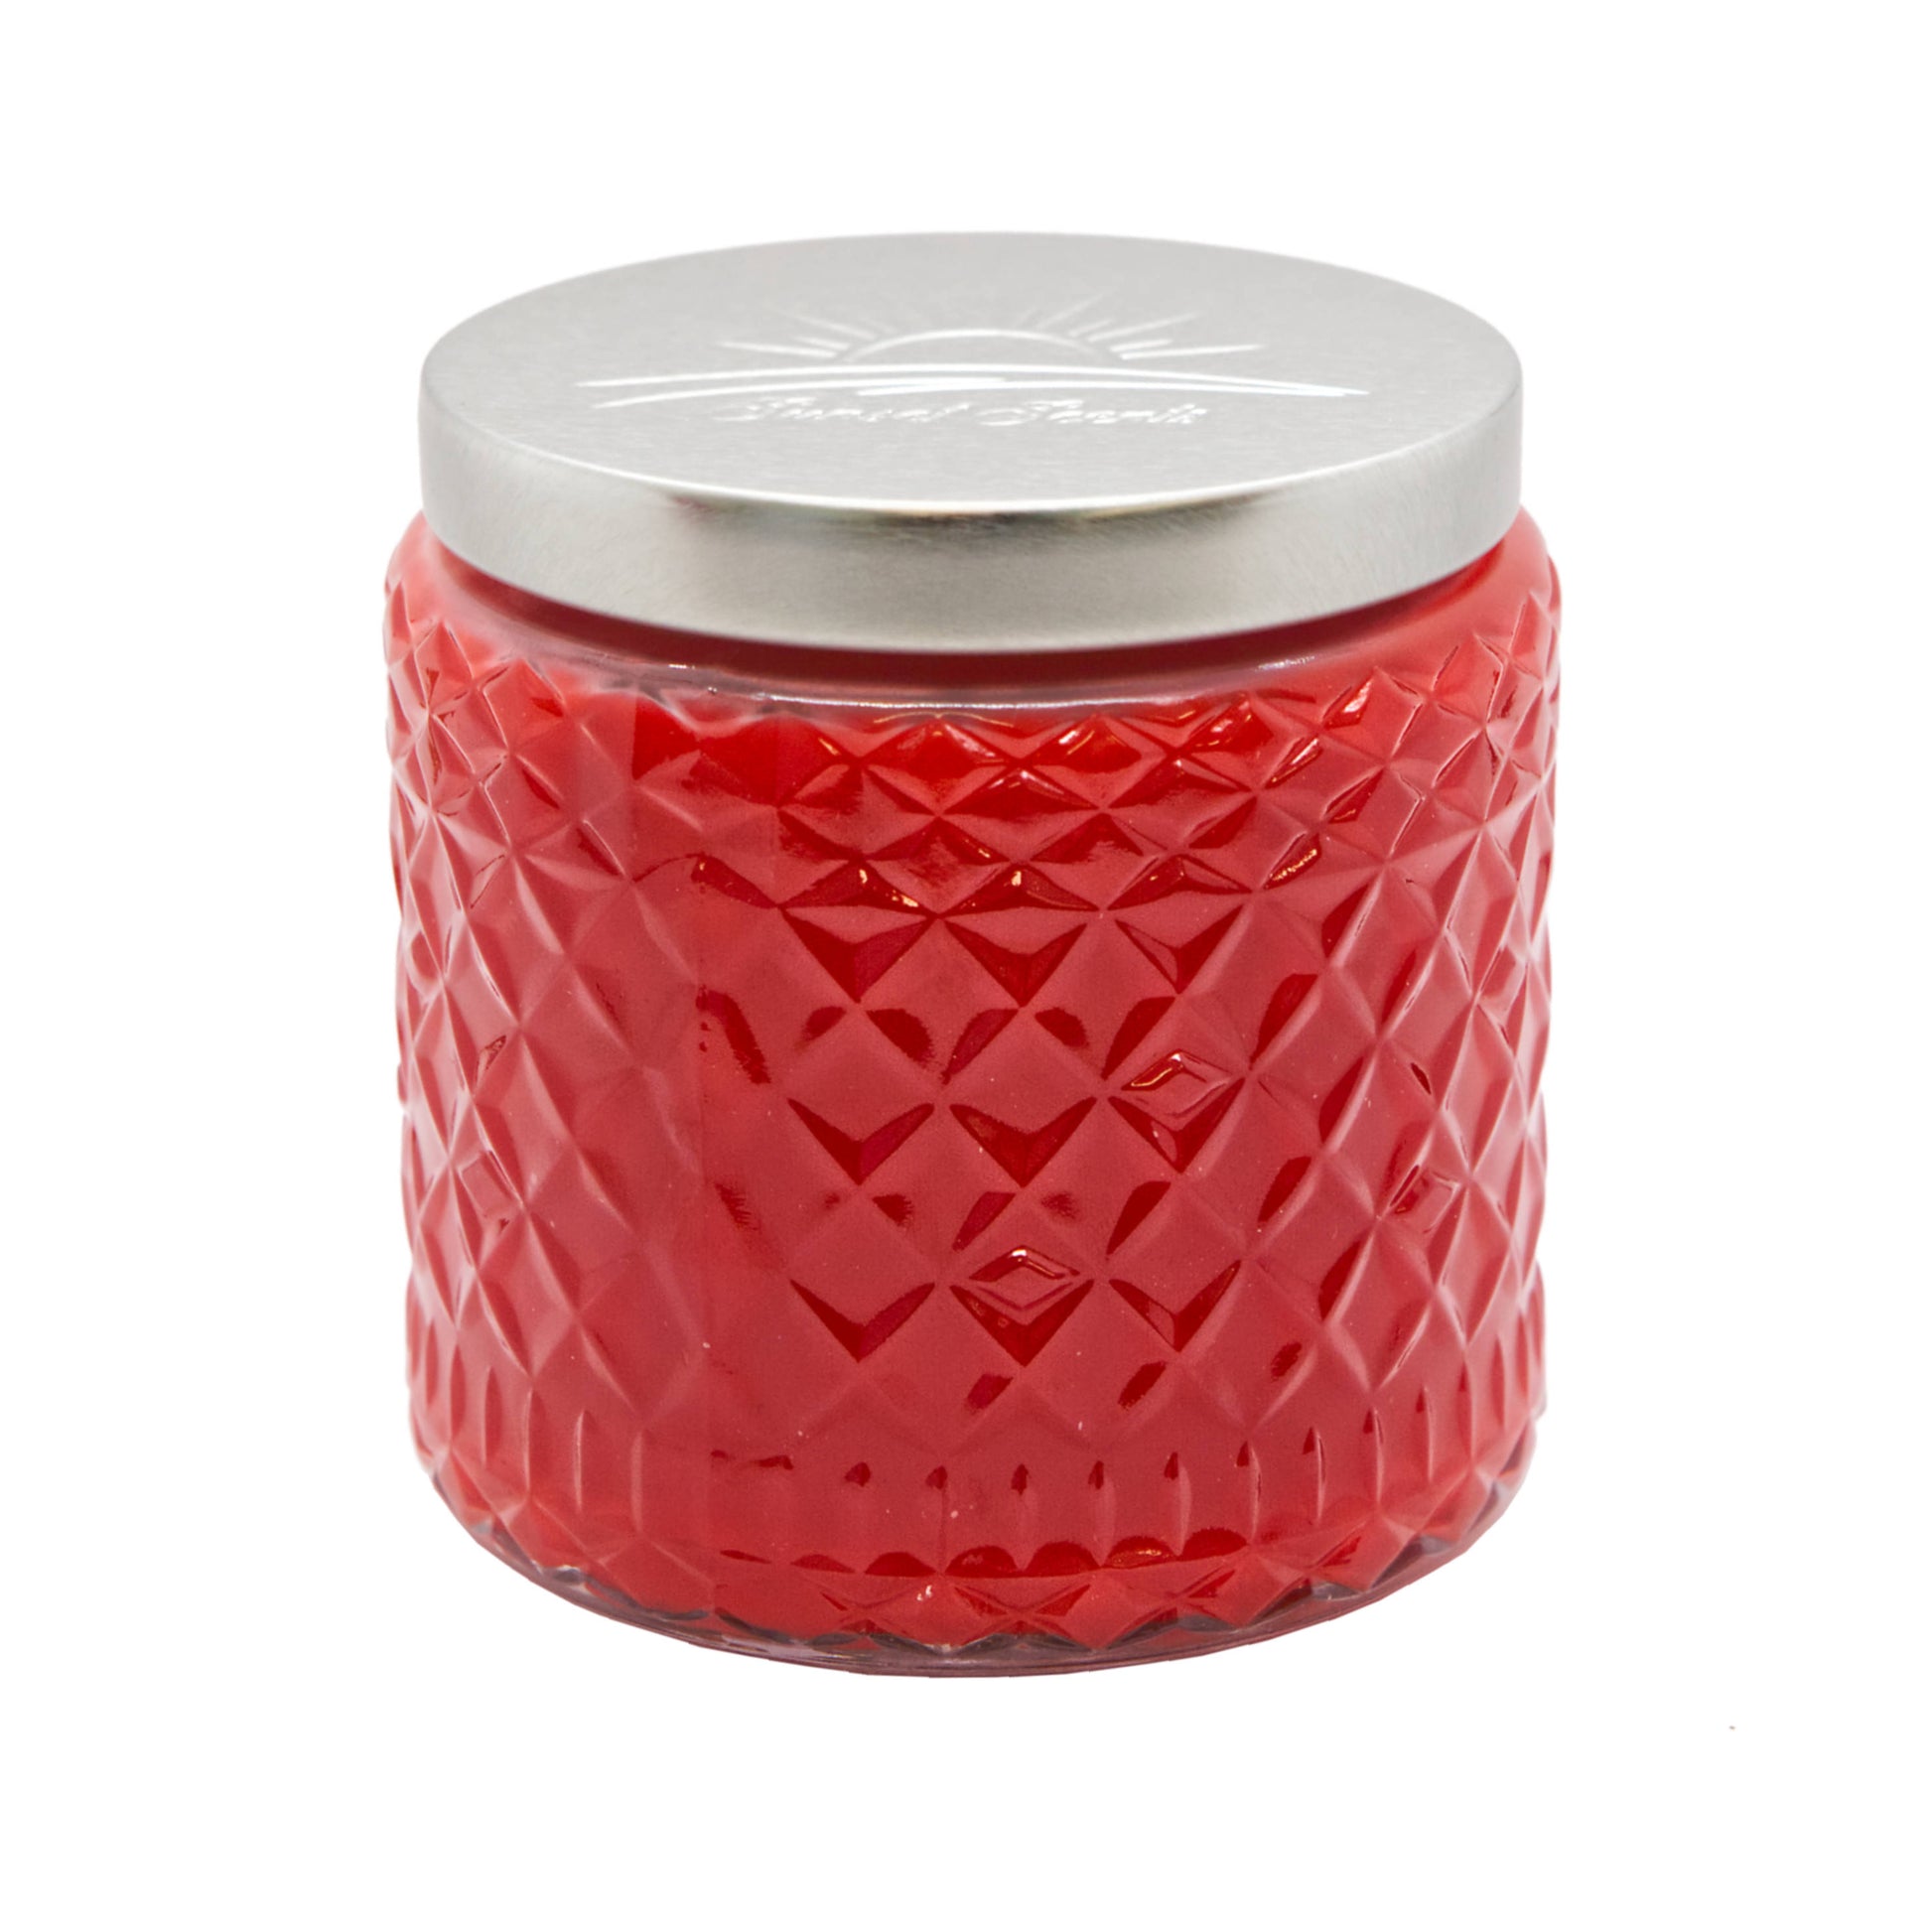 Berries Jubilee Scented Candle 16oz